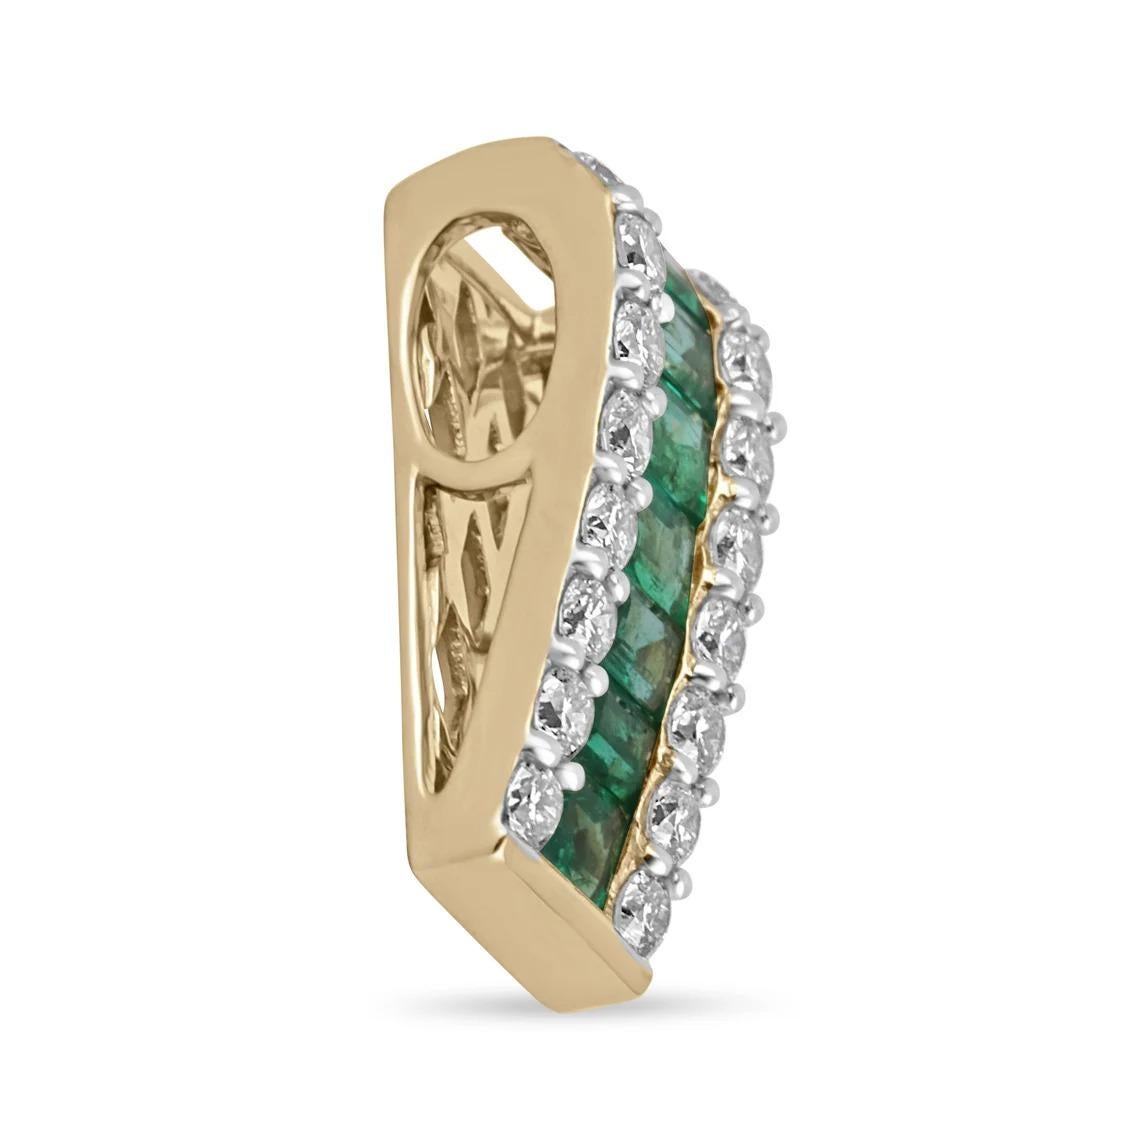 A stunning emerald and diamond unisex pendant. Between almost a full carat of pave set, brilliant round cut diamonds are 1.36-carats (total) of natural emeralds; set east to west, with stunning green color and great characteristics. Carefully set in